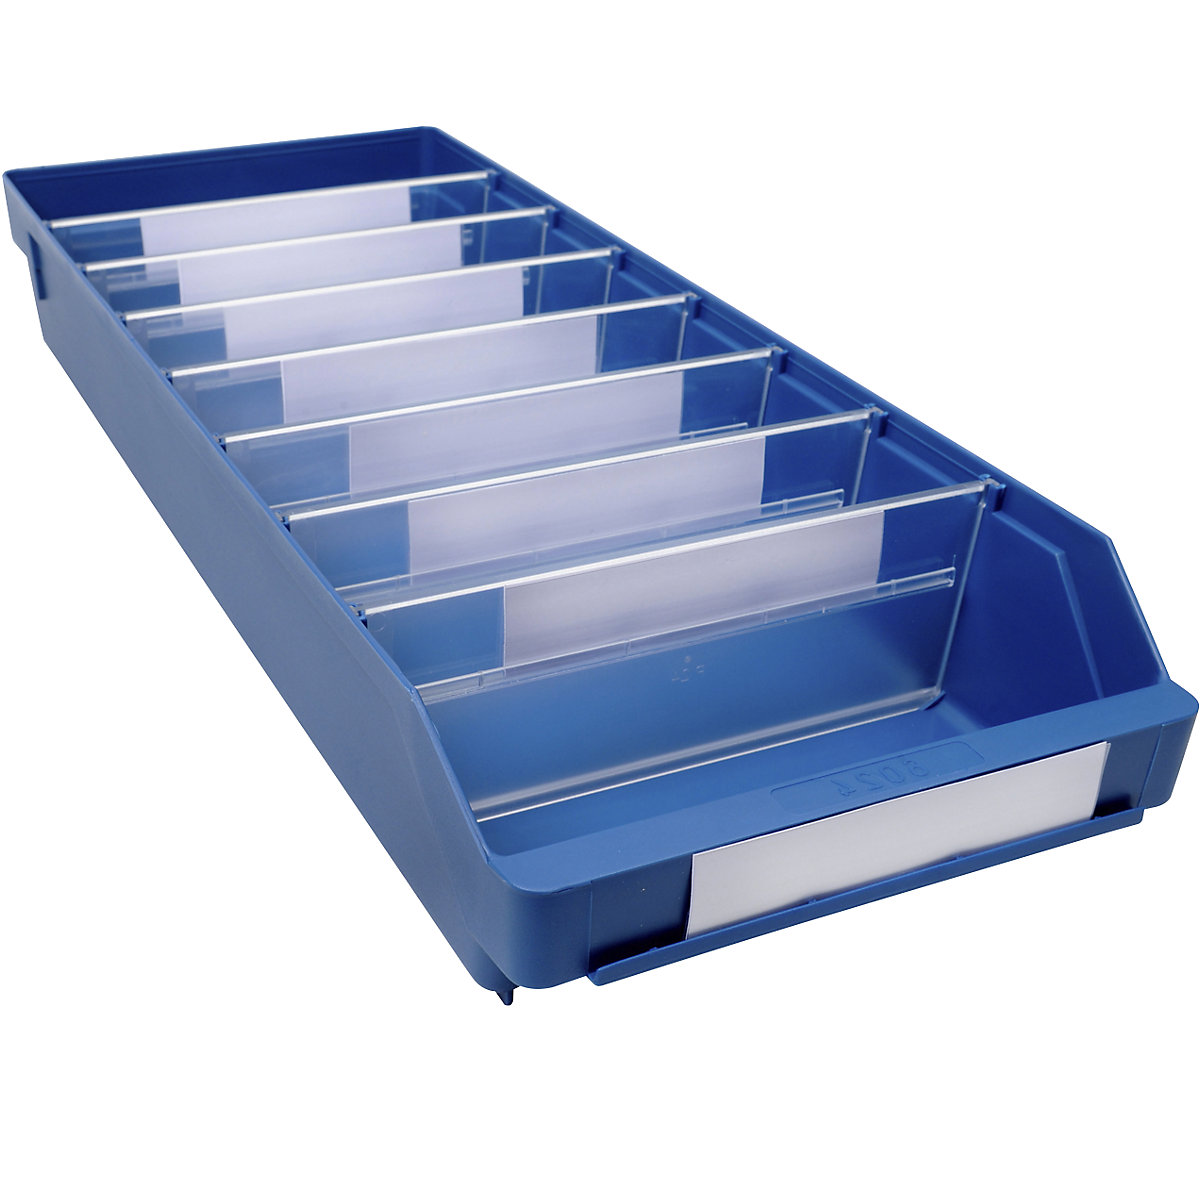 Shelf bin made of highly impact resistant polypropylene – STEMO, blue, LxWxH 600 x 240 x 95 mm, pack of 15-19